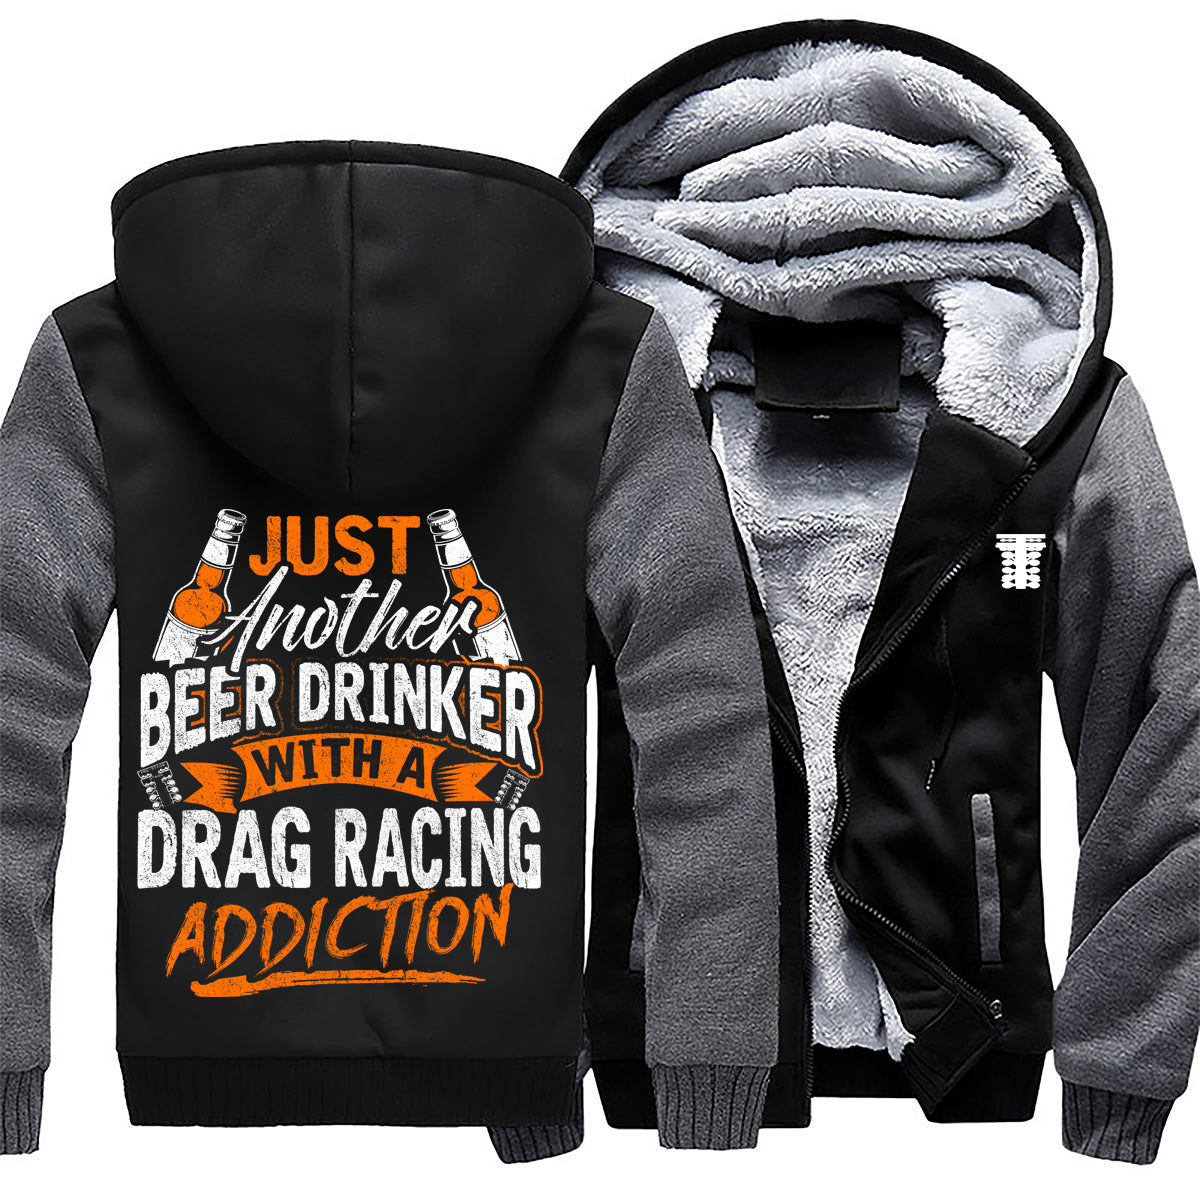 Just Another Beer Drinker With A Drag Racing Addiction Jacket 